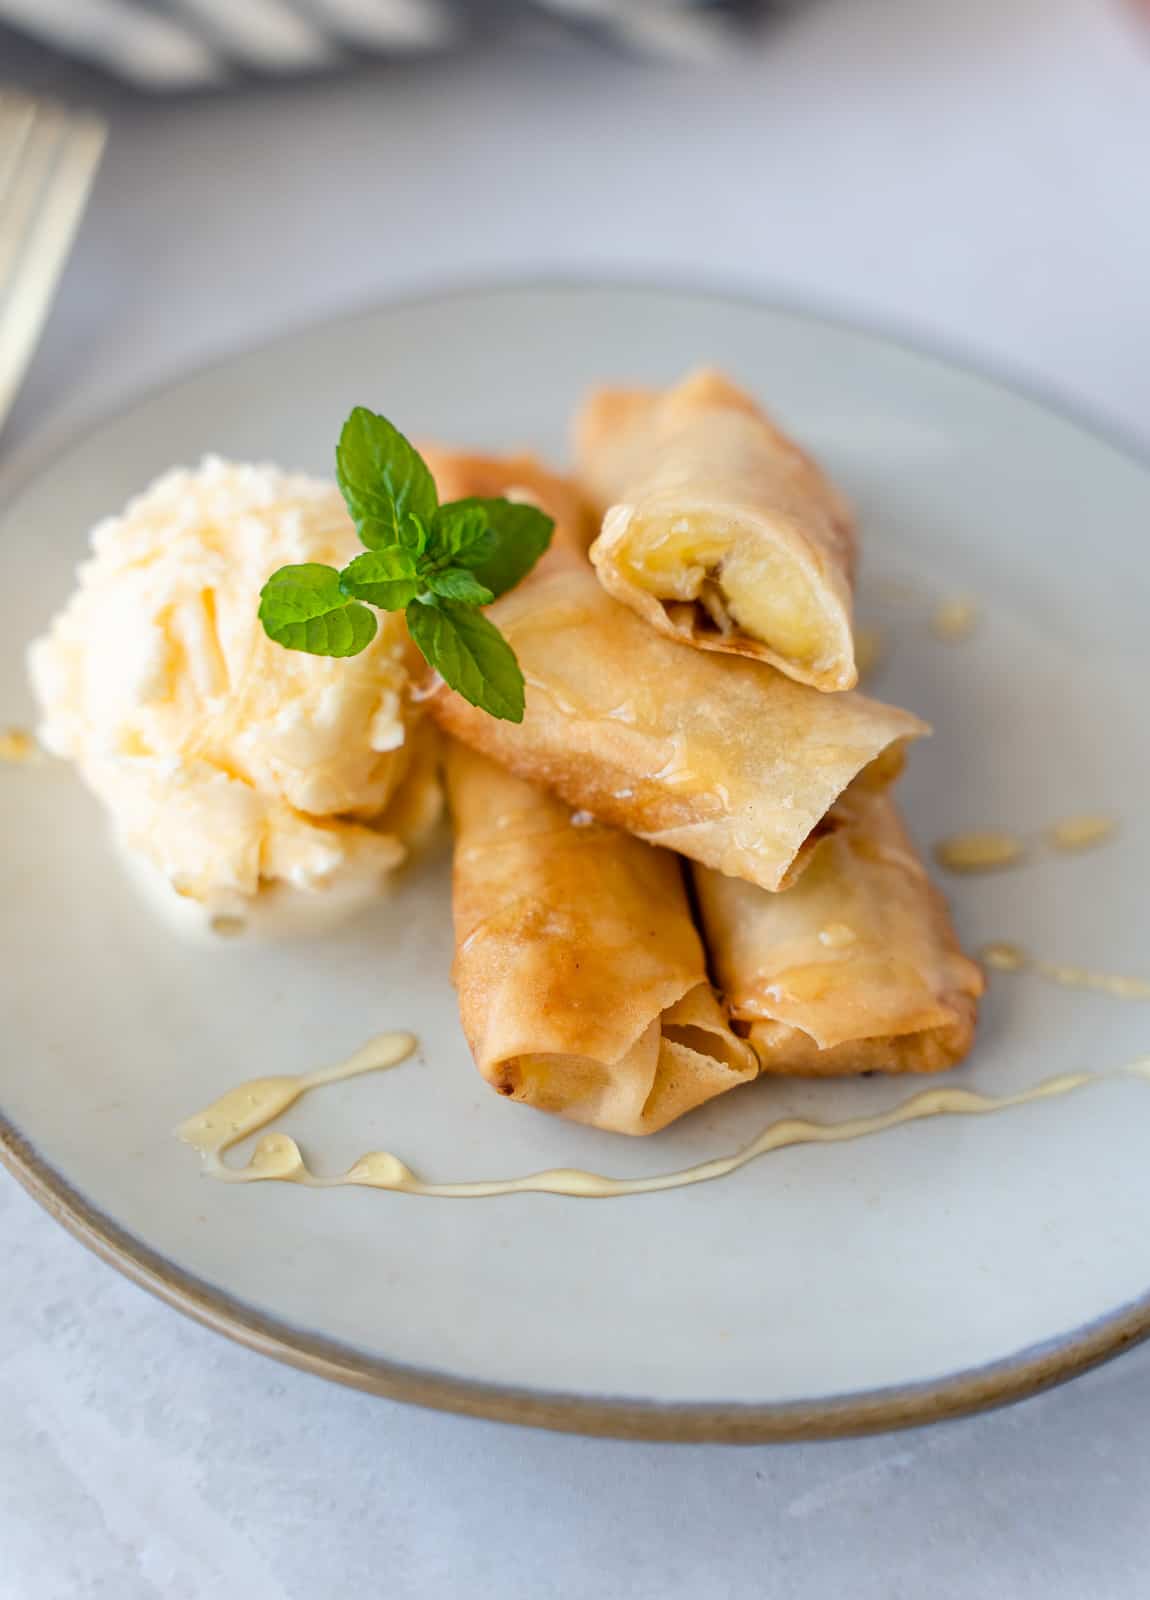 Fried banana rolls on a plate with ice cream and honey drizzled.